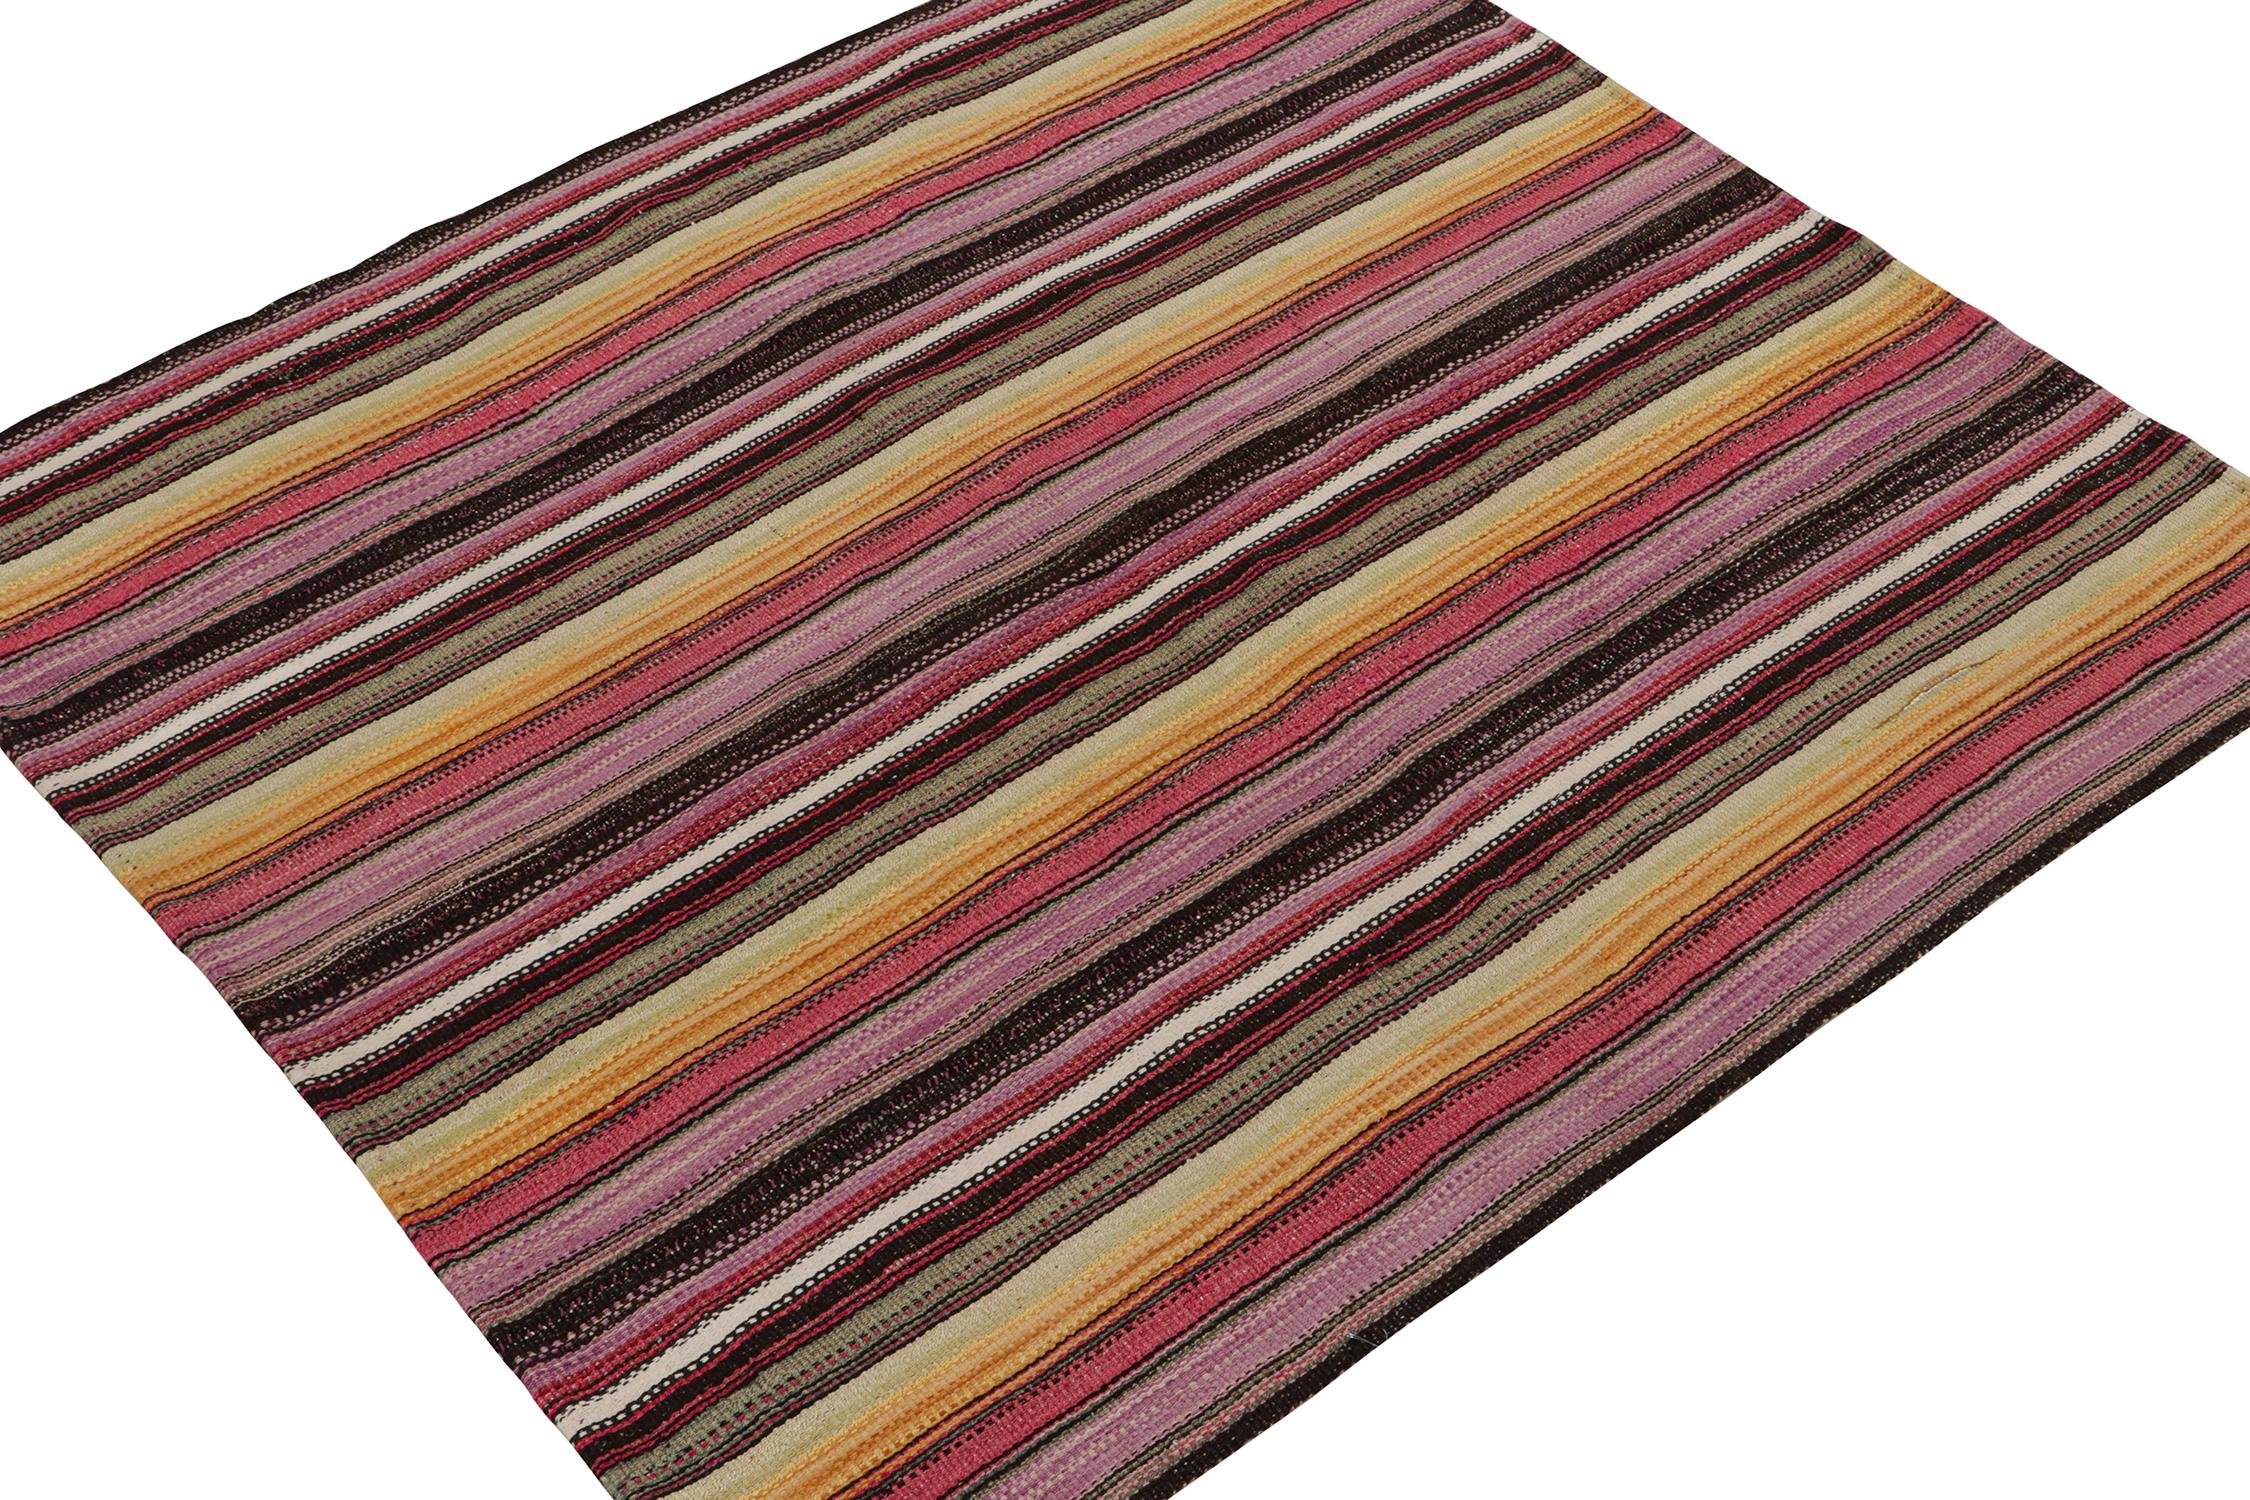 Tribal Vintage Persian Kilim with Polychromatic Stripes, Panel Style by Rug & Kilim For Sale